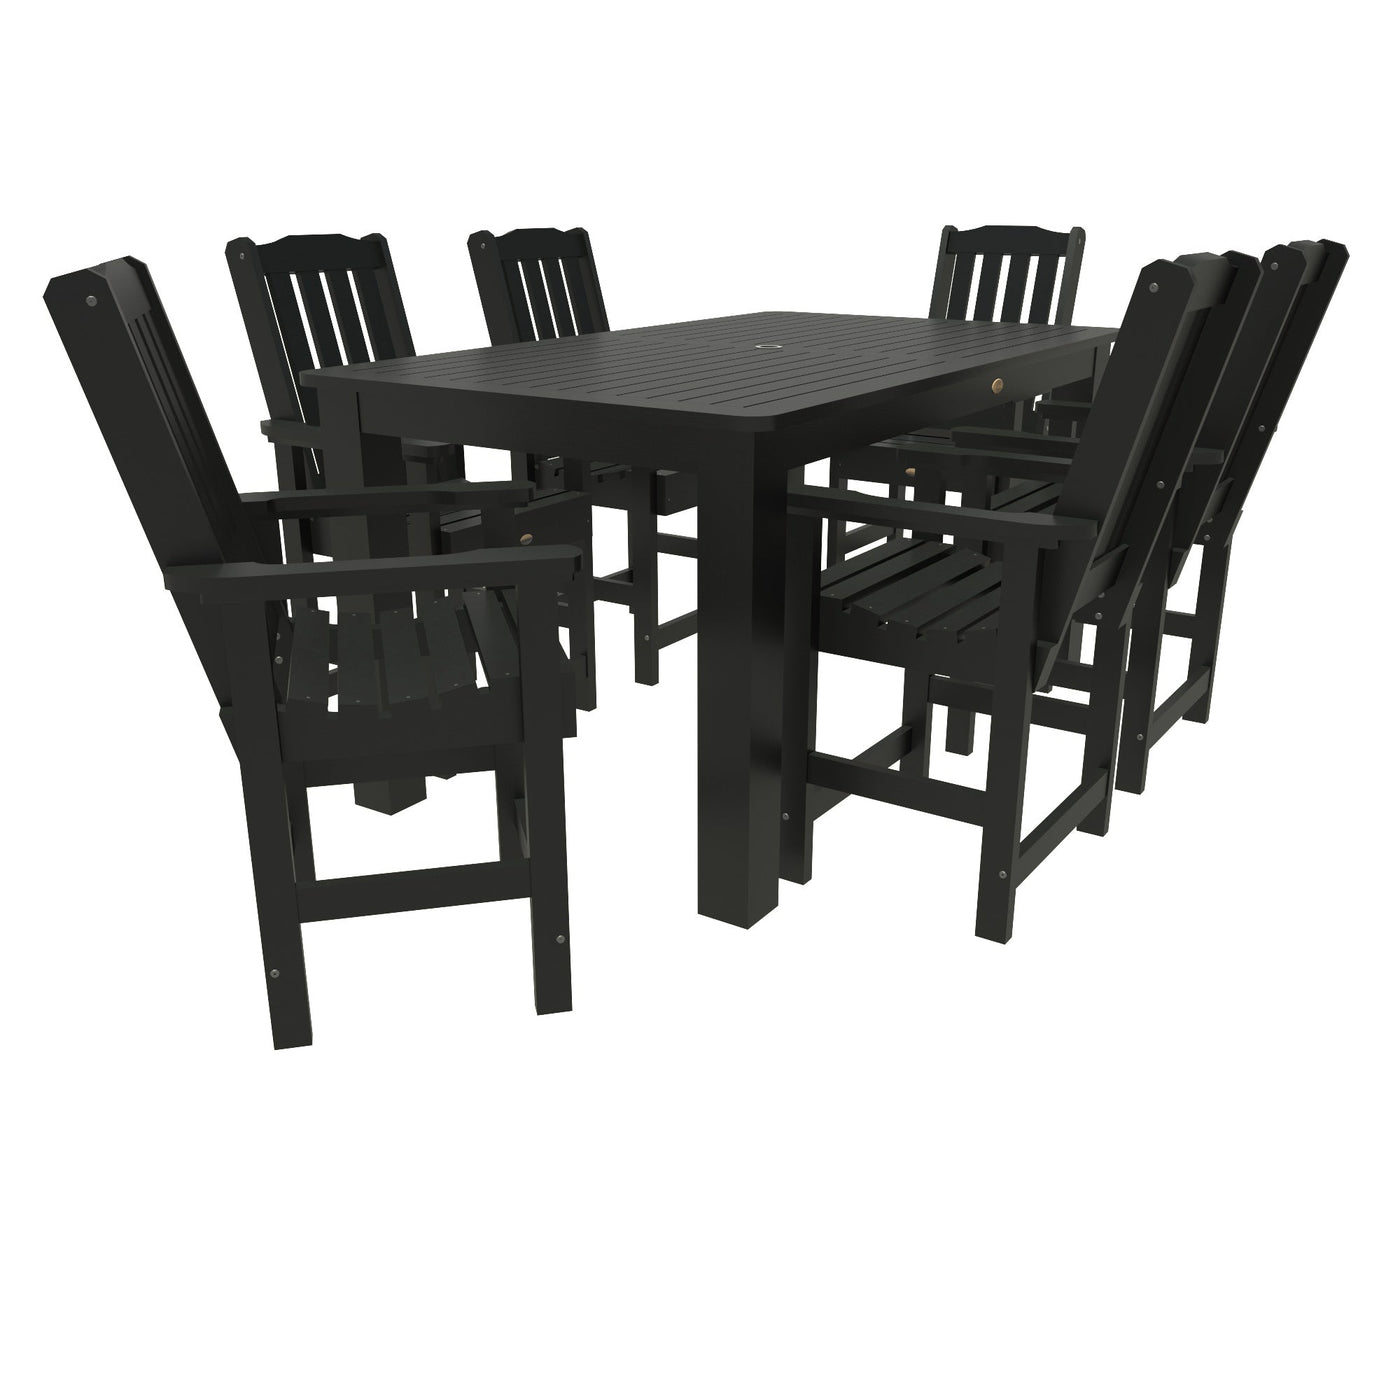 Lehigh 7pc Rectangular Outdoor Dining Set 42in x 72in - Counter Height Dining Highwood USA Black 